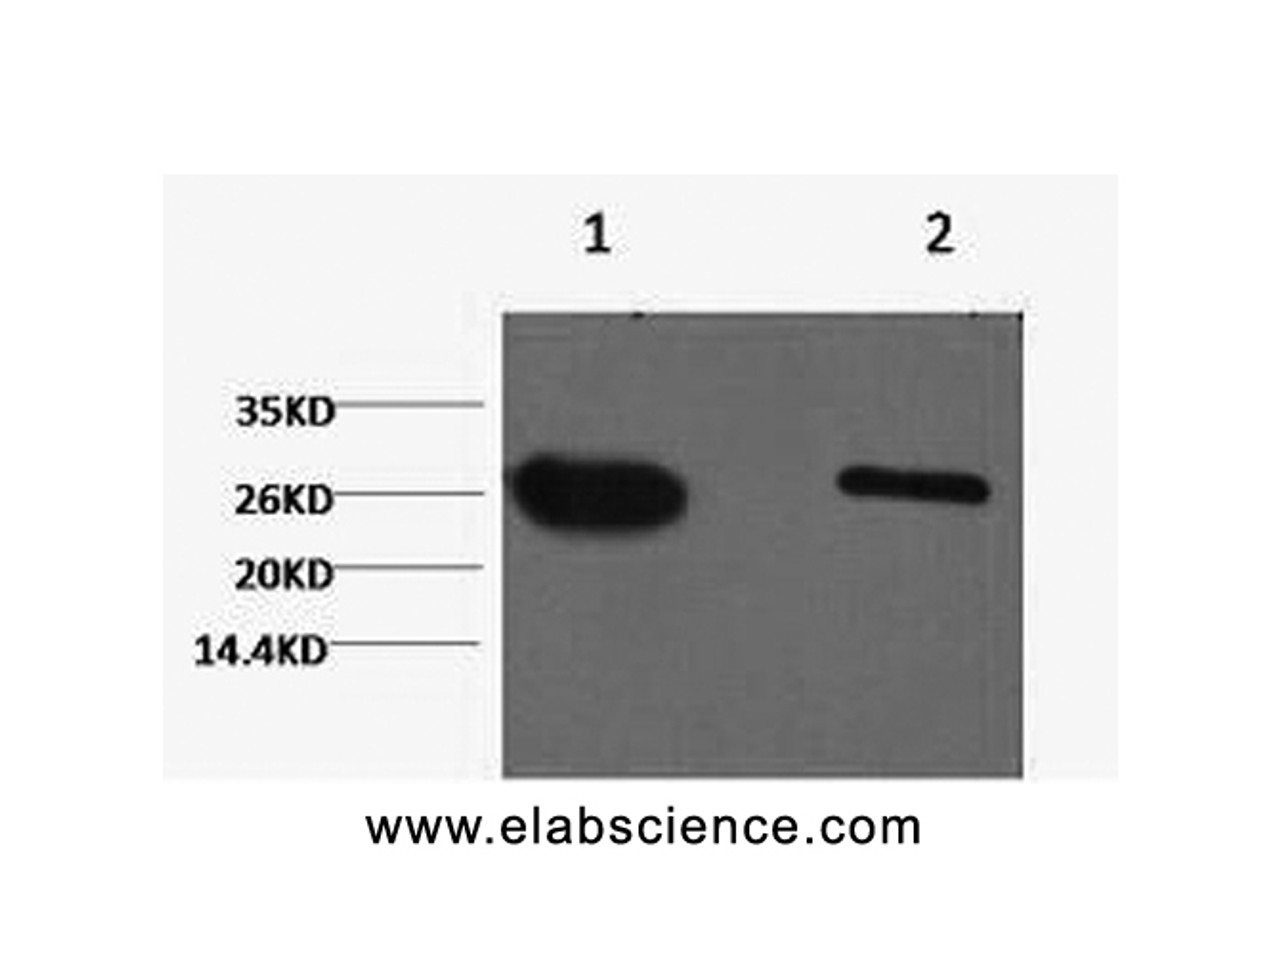 Western Blot analysis of GFP transfected Hela cells using GFP Monoclonal Antibody at dilution of 1) 1:5000 2) 1:10000.